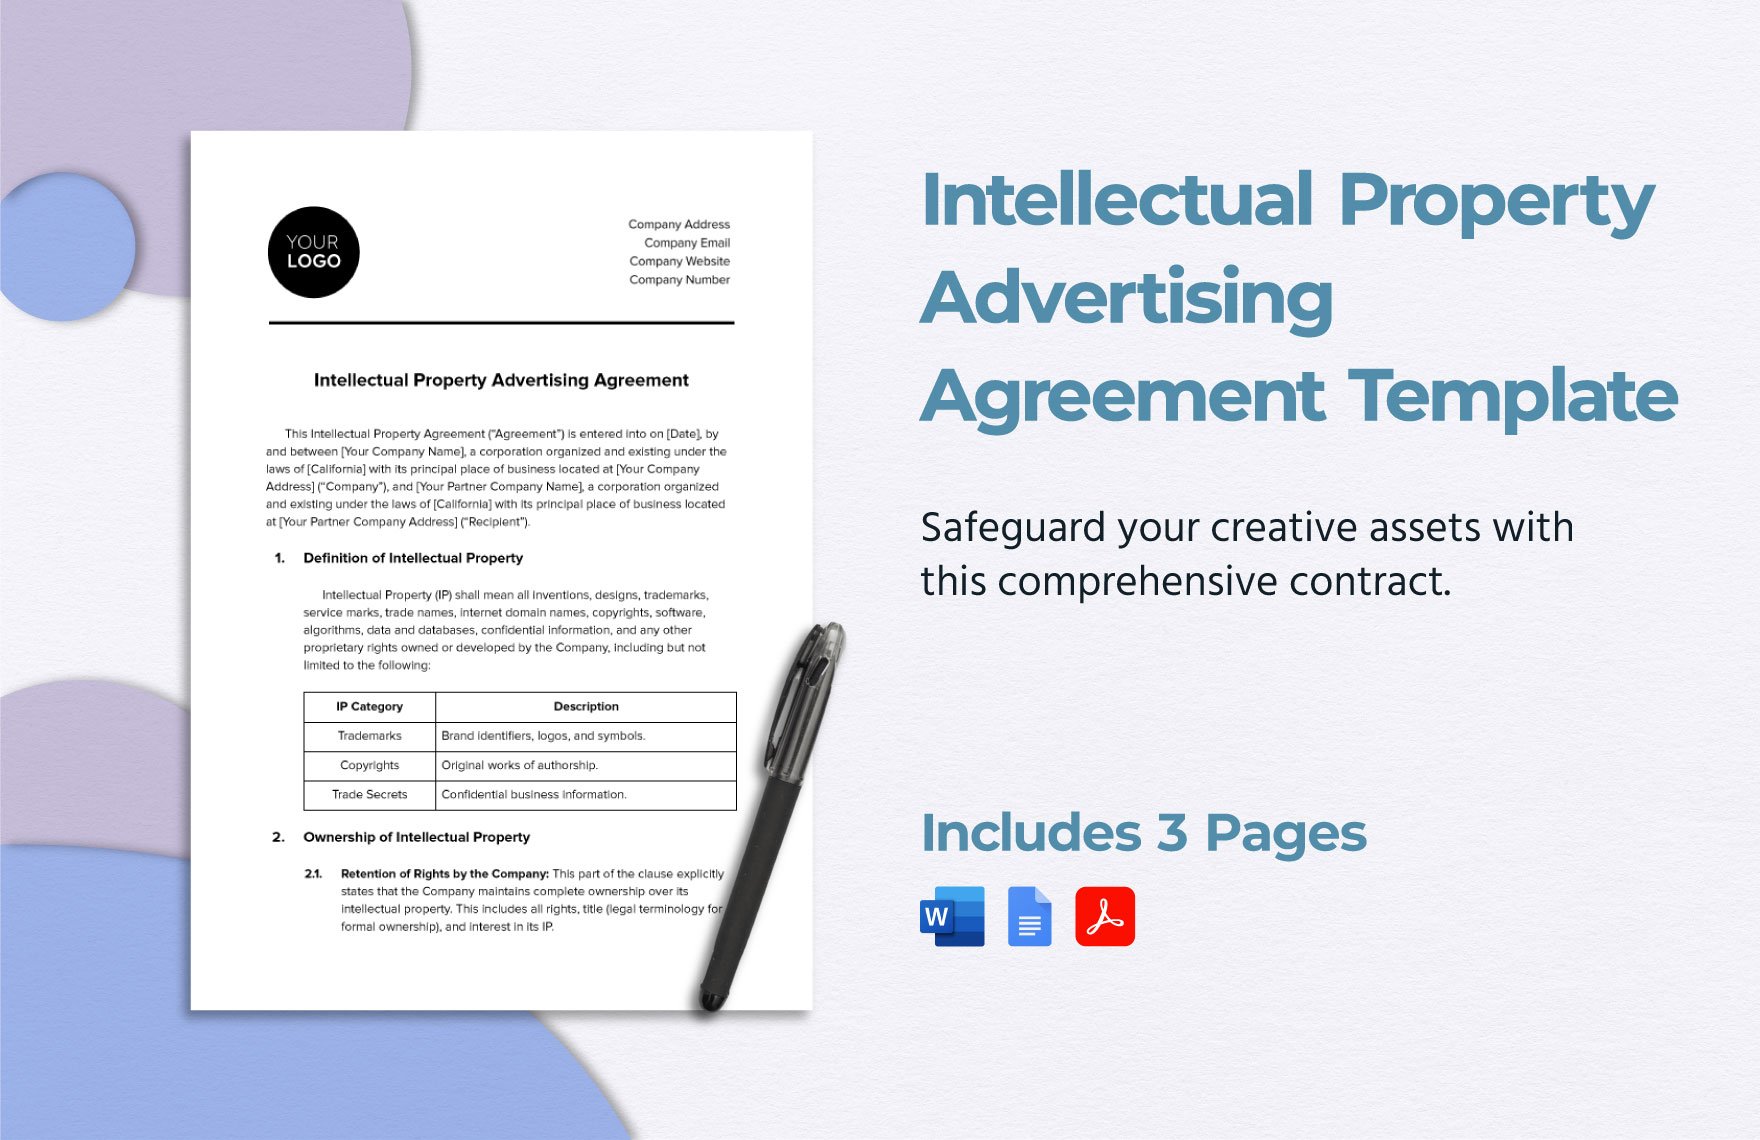 Intellectual Property Advertising Agreement Template